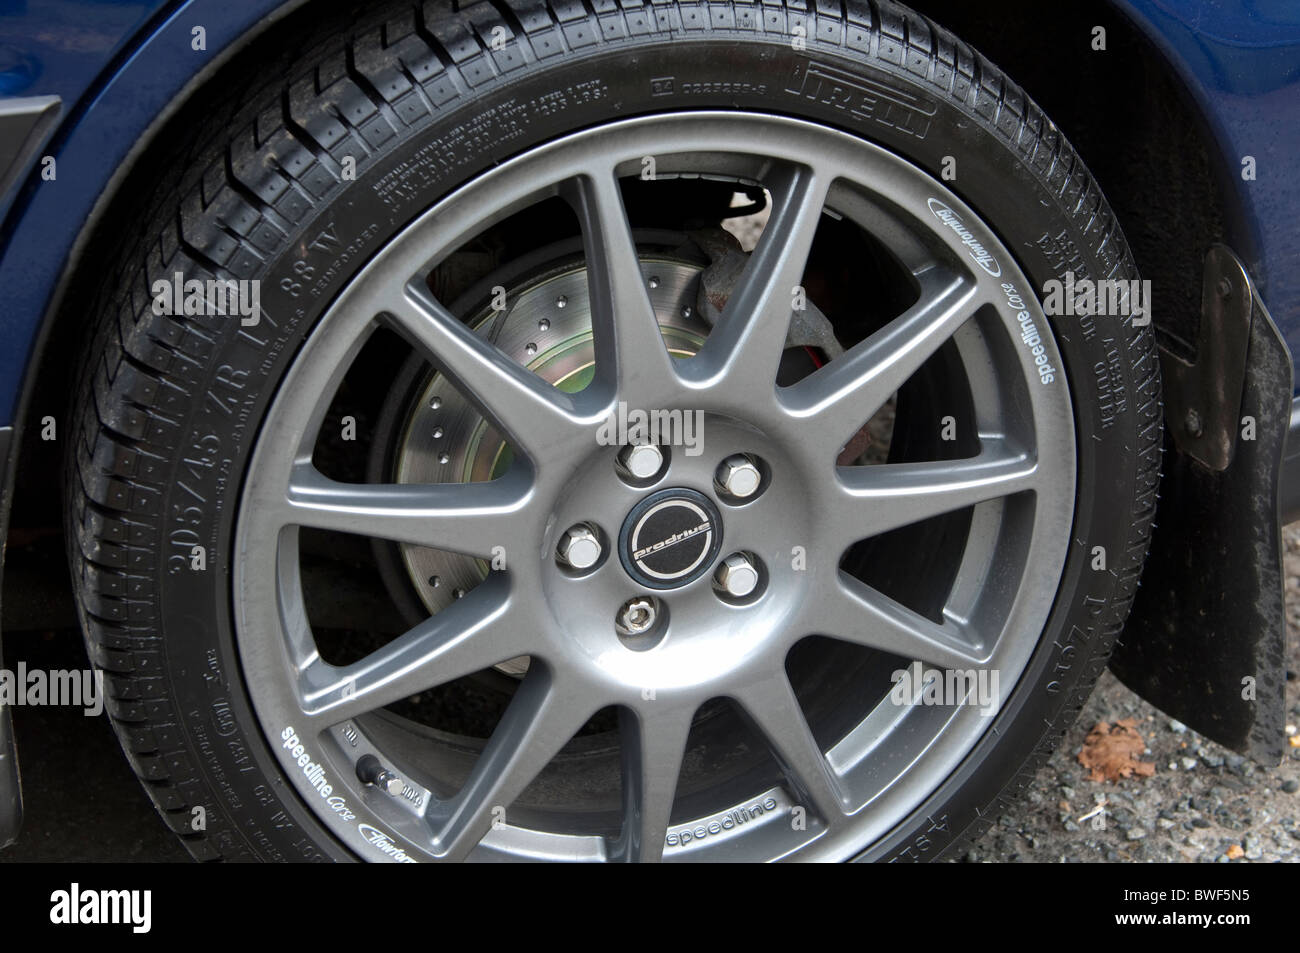 Vented and dimpled brake disc and alloy wheel Stock Photo